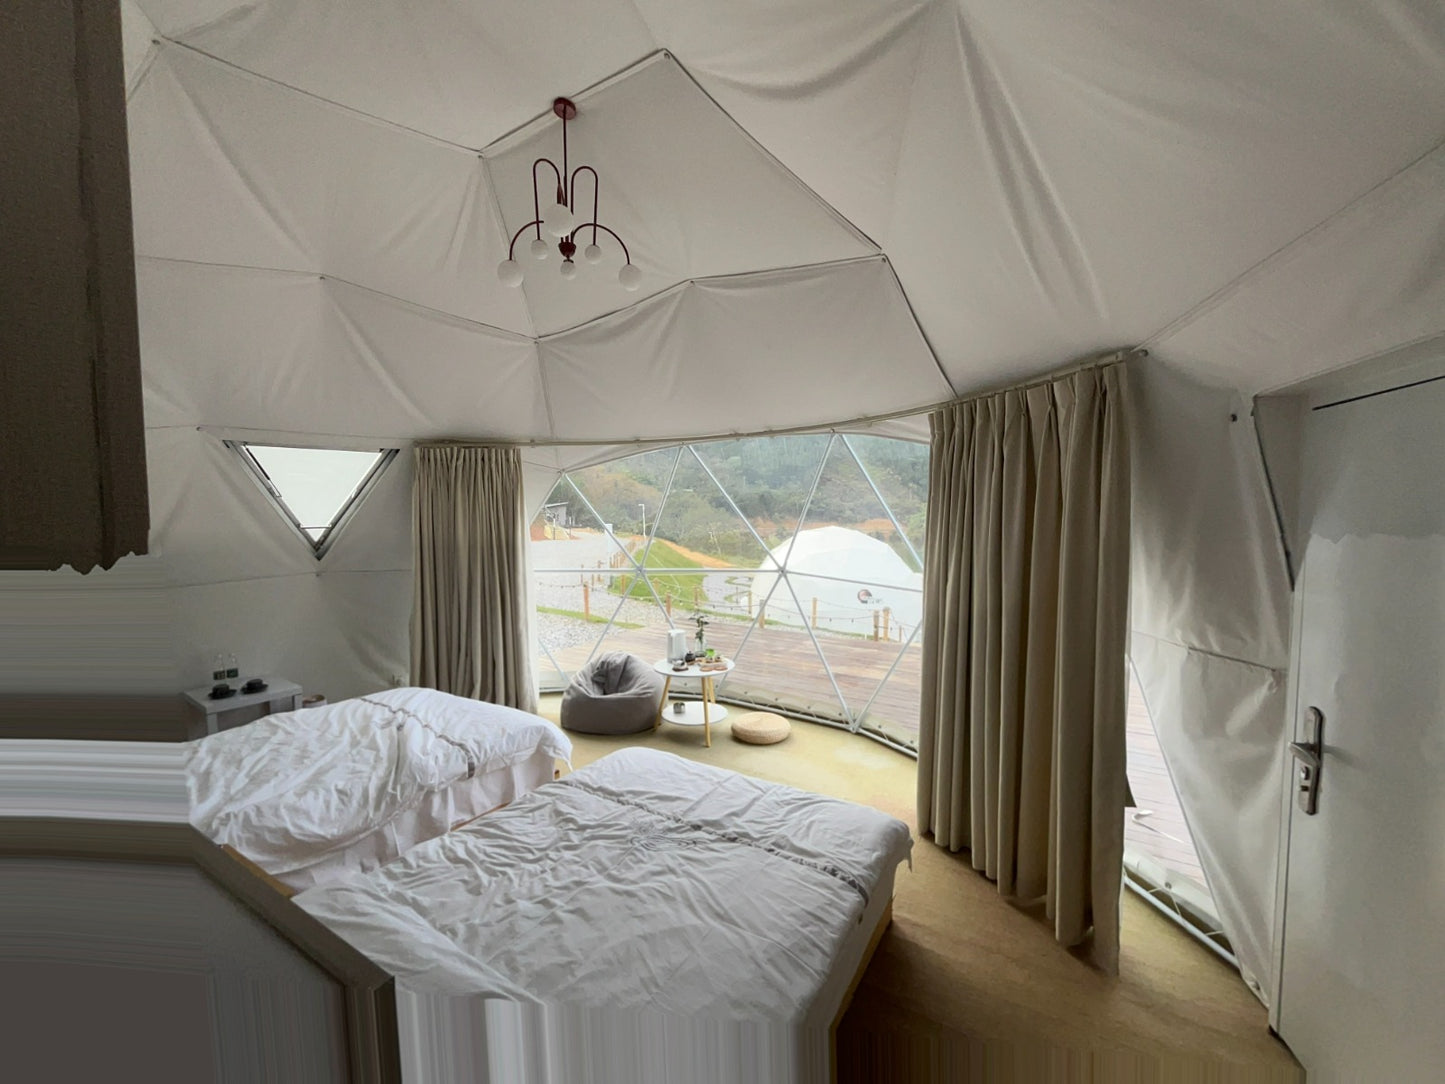 Premium Geodesic Dome Outdoor Glamping